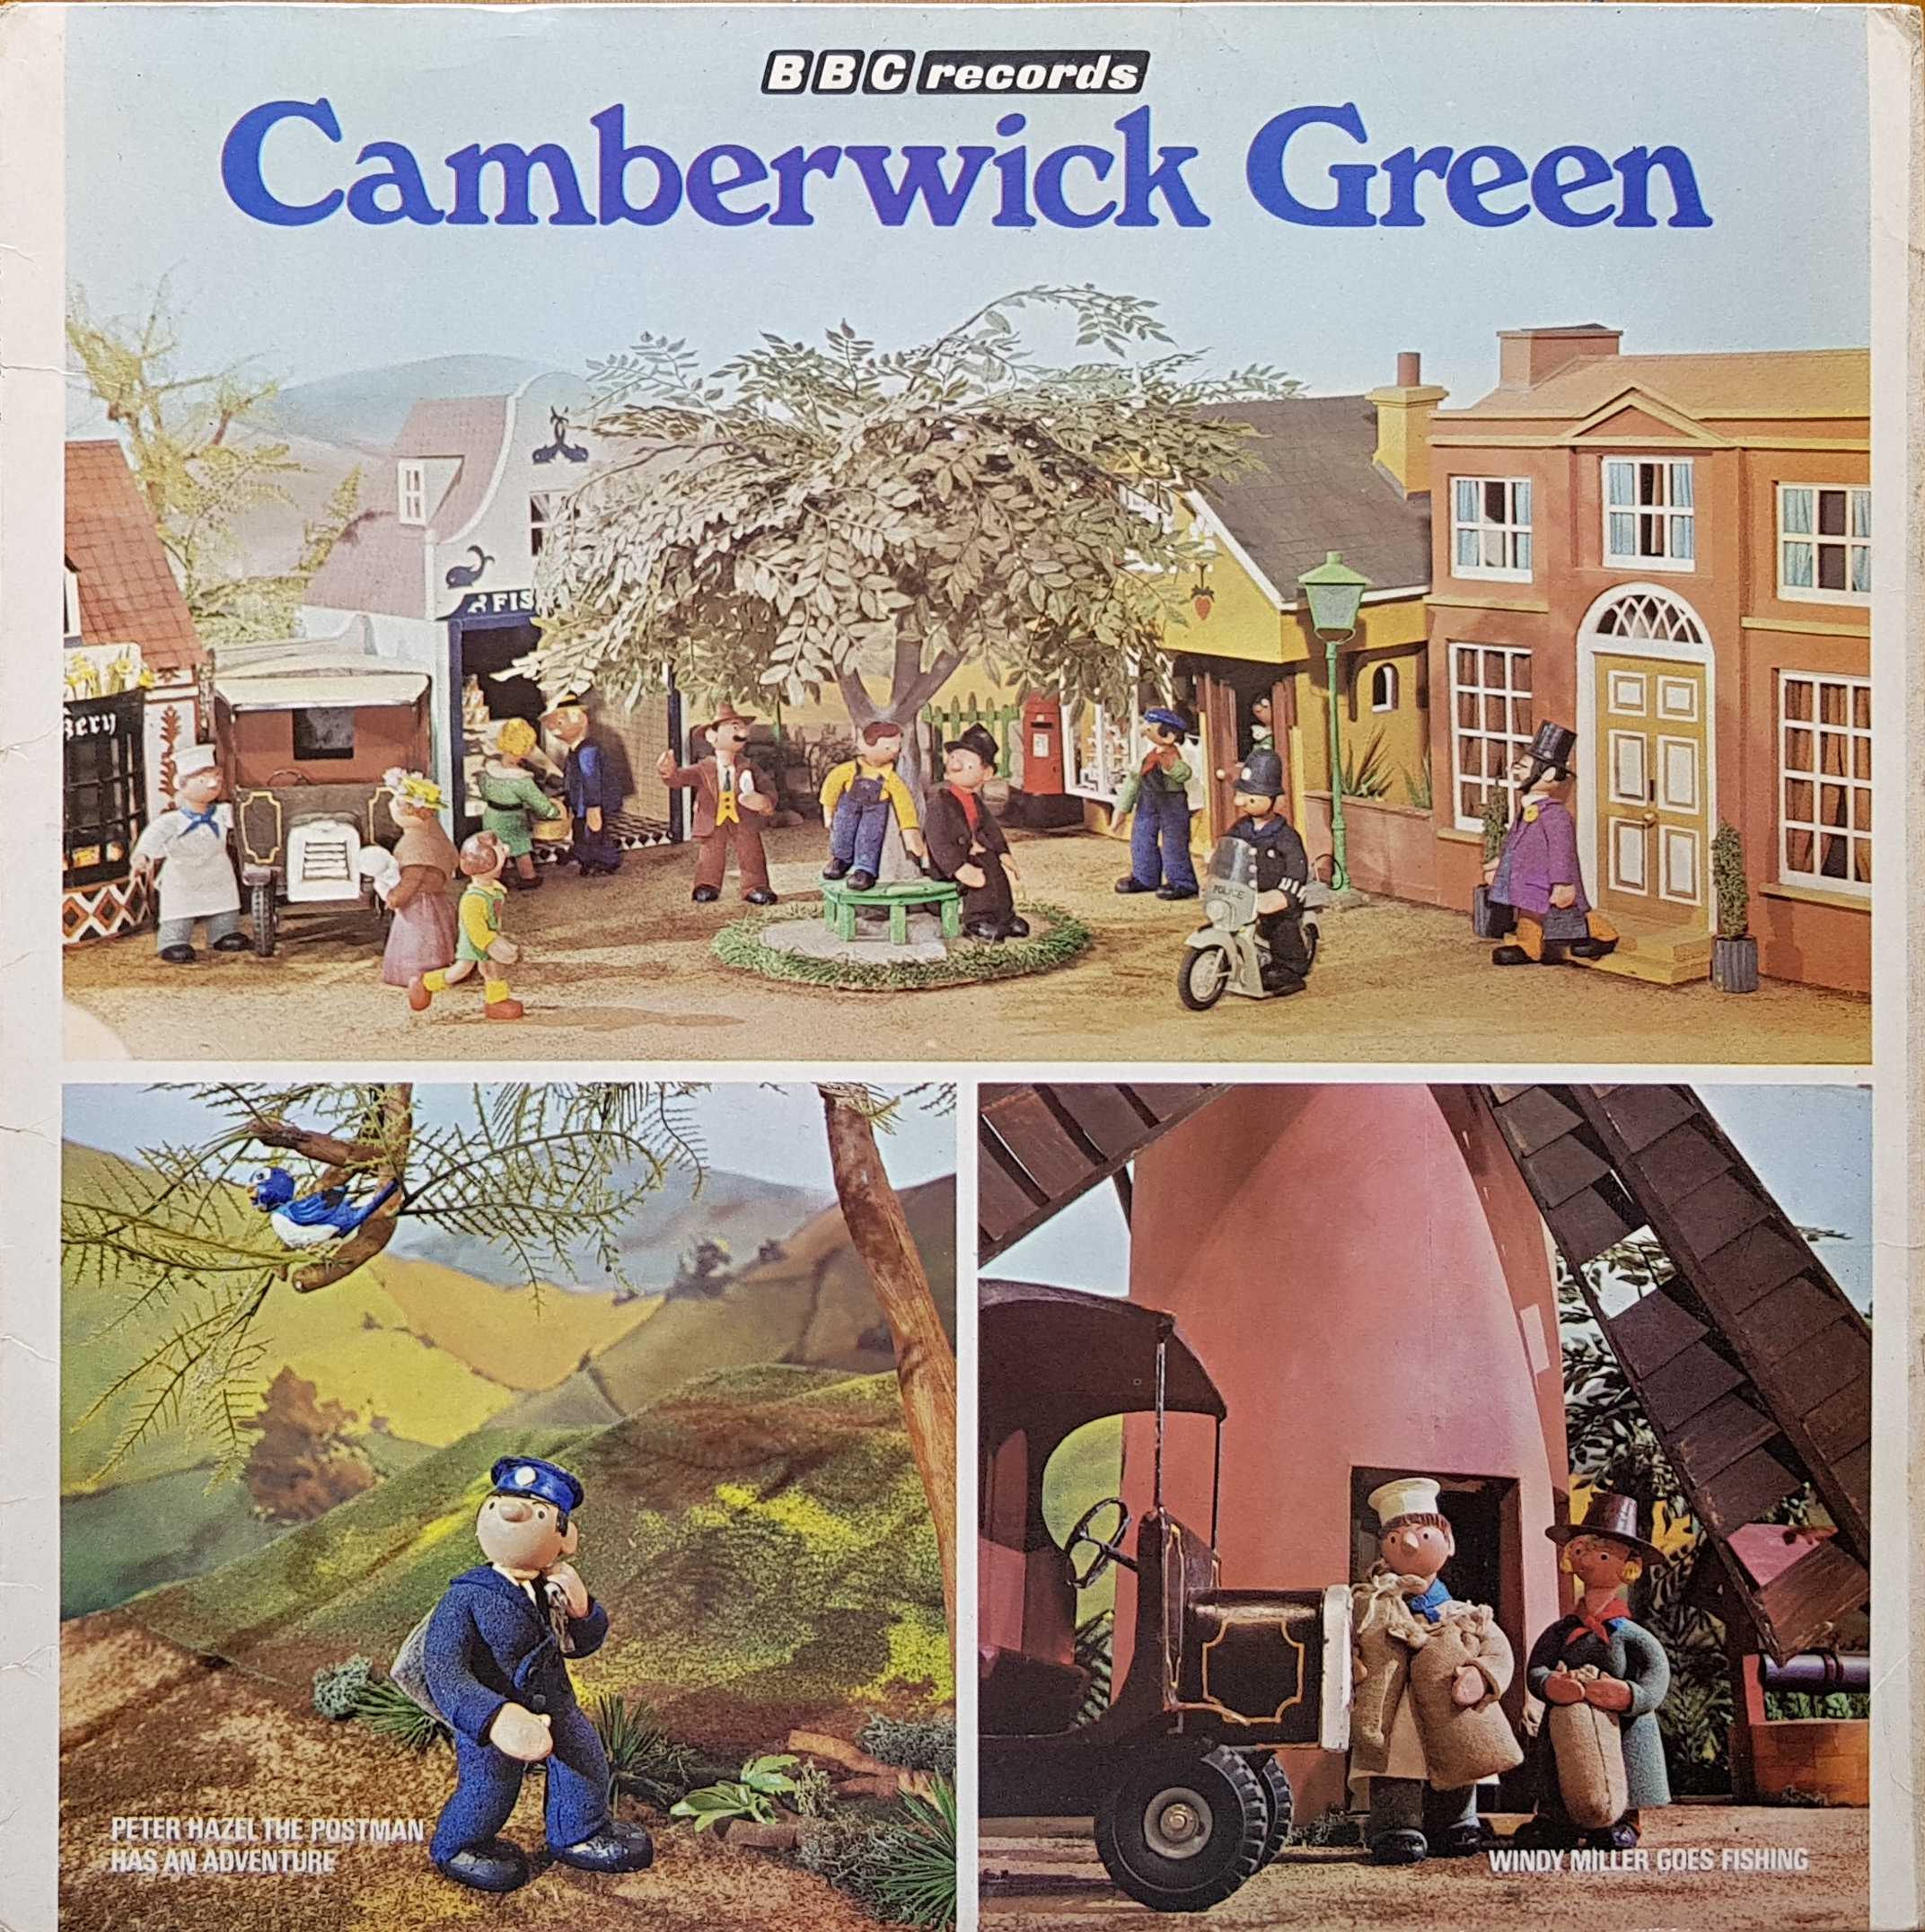 Picture of RBT 13 Camberwick Green by artist Brian Cant / Freddie Phillips from the BBC albums - Records and Tapes library